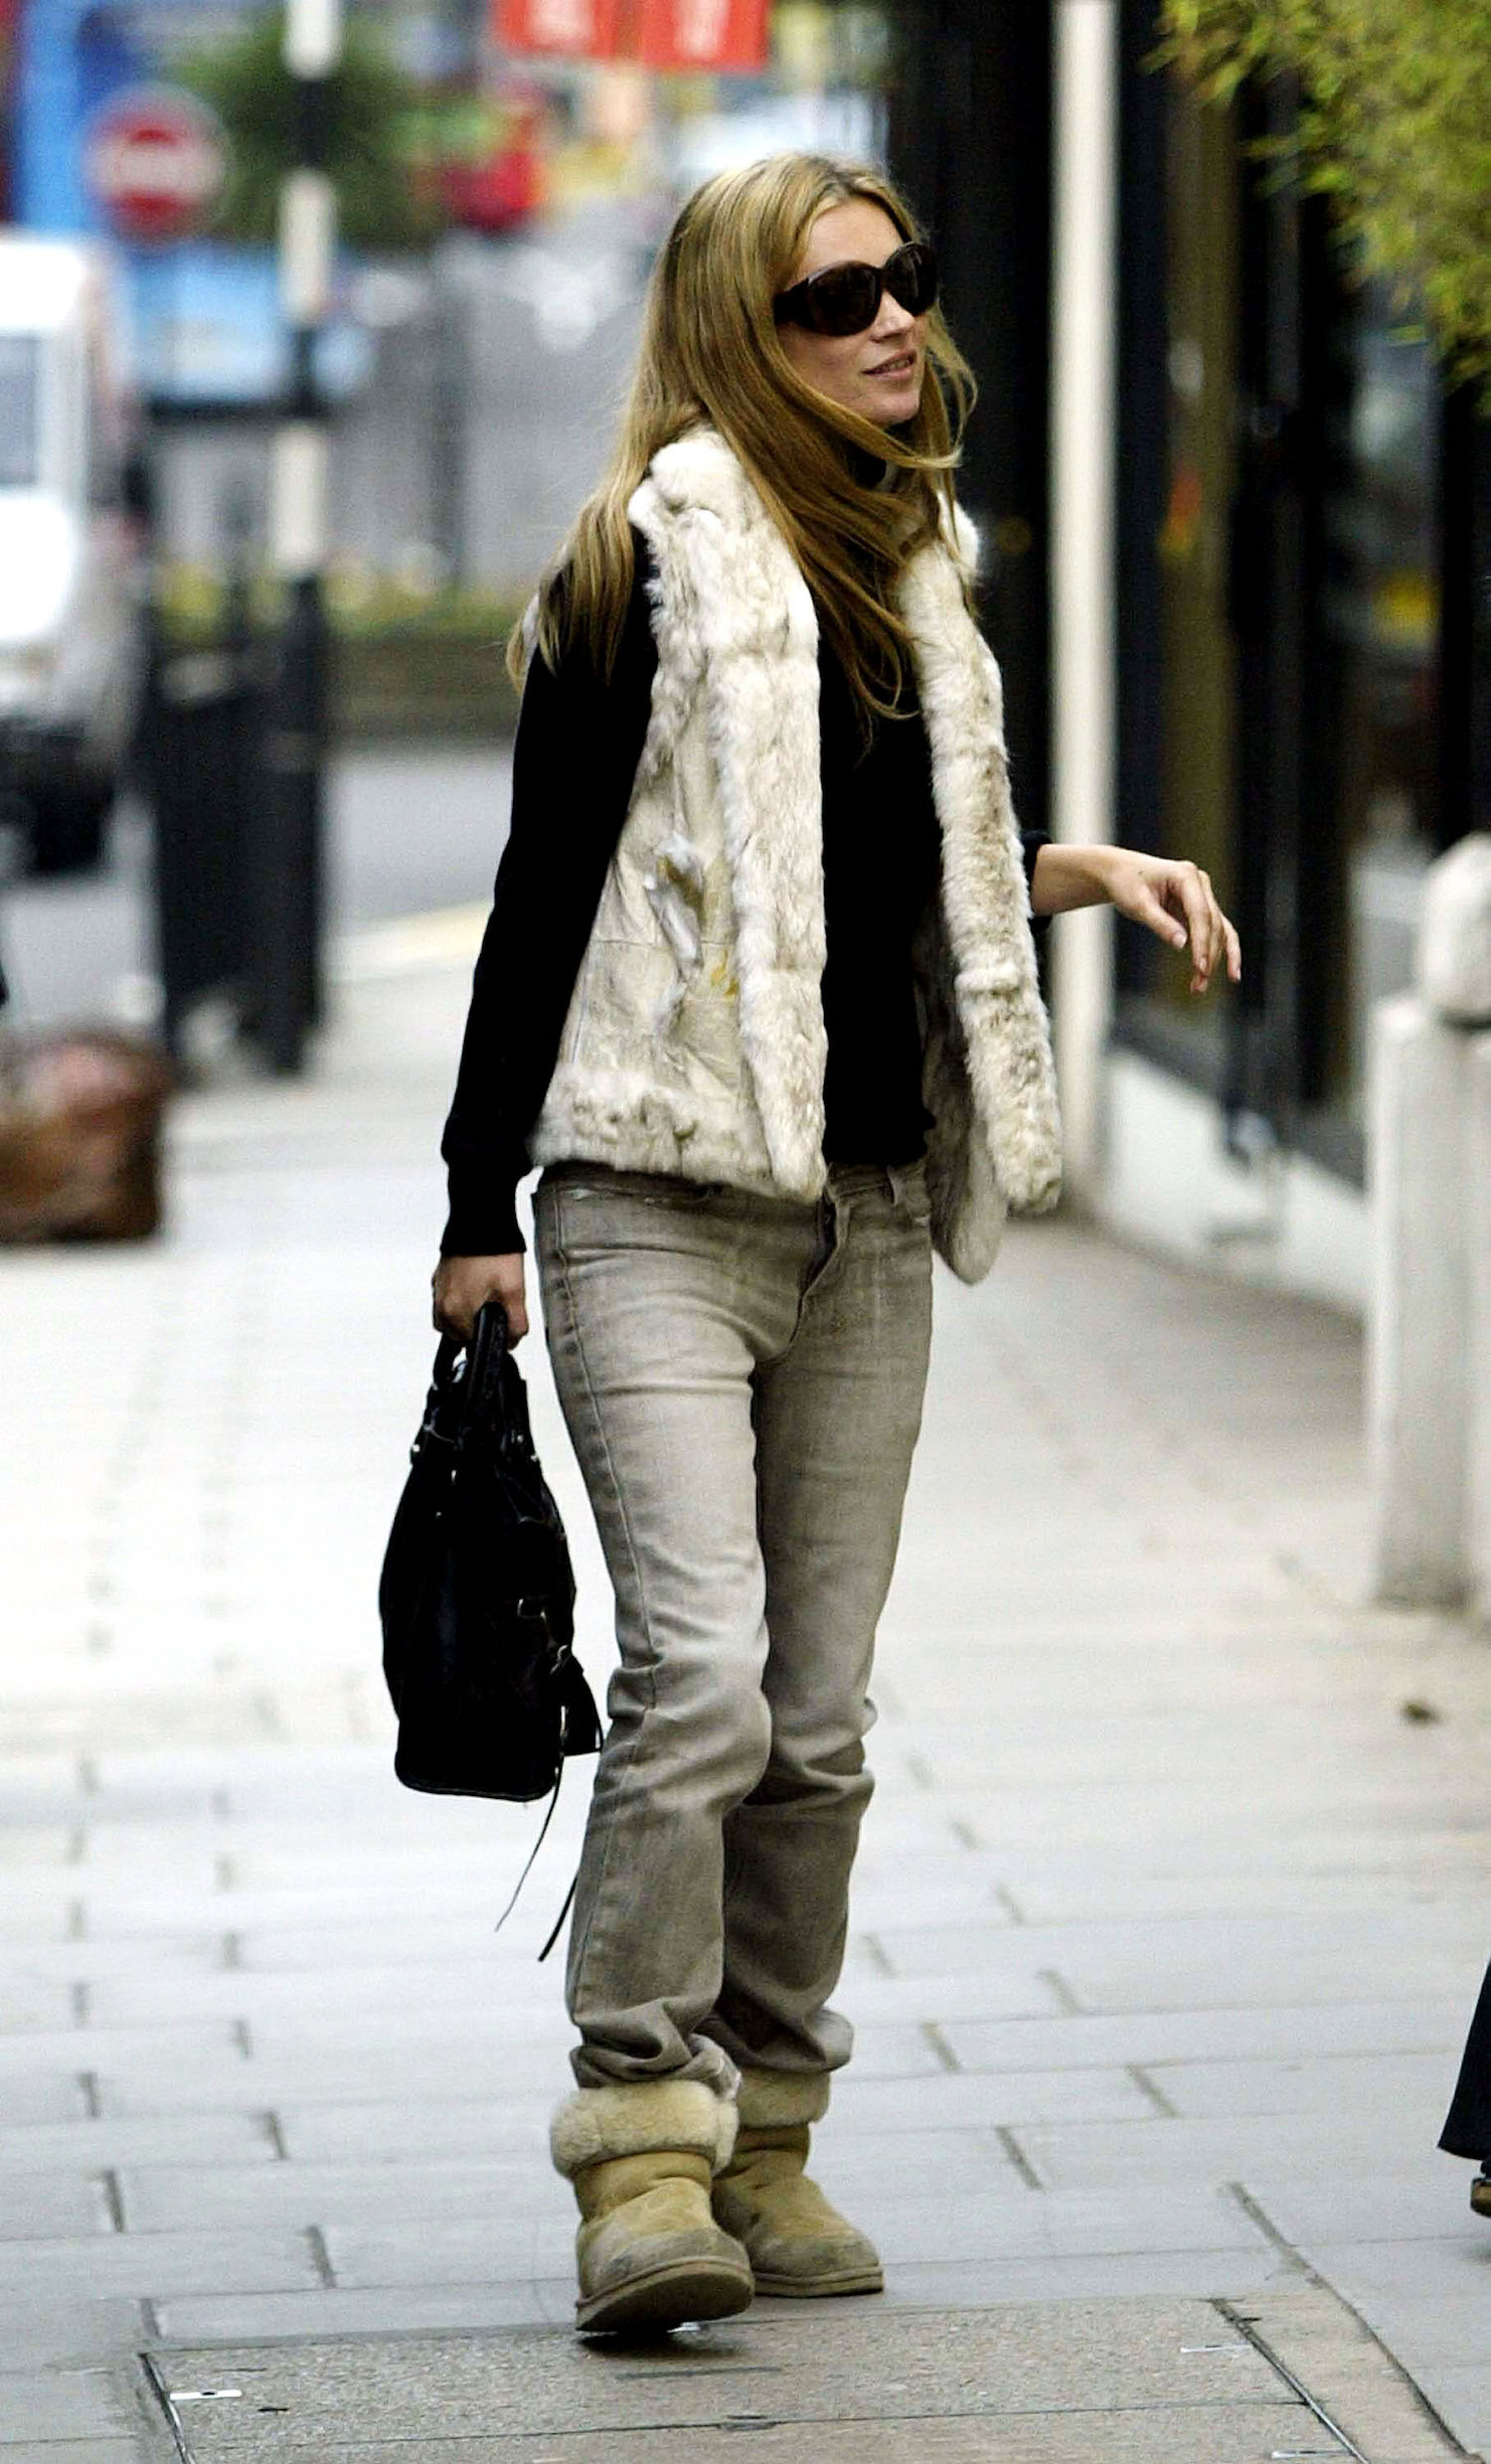 Kate Moss uggs and jeans